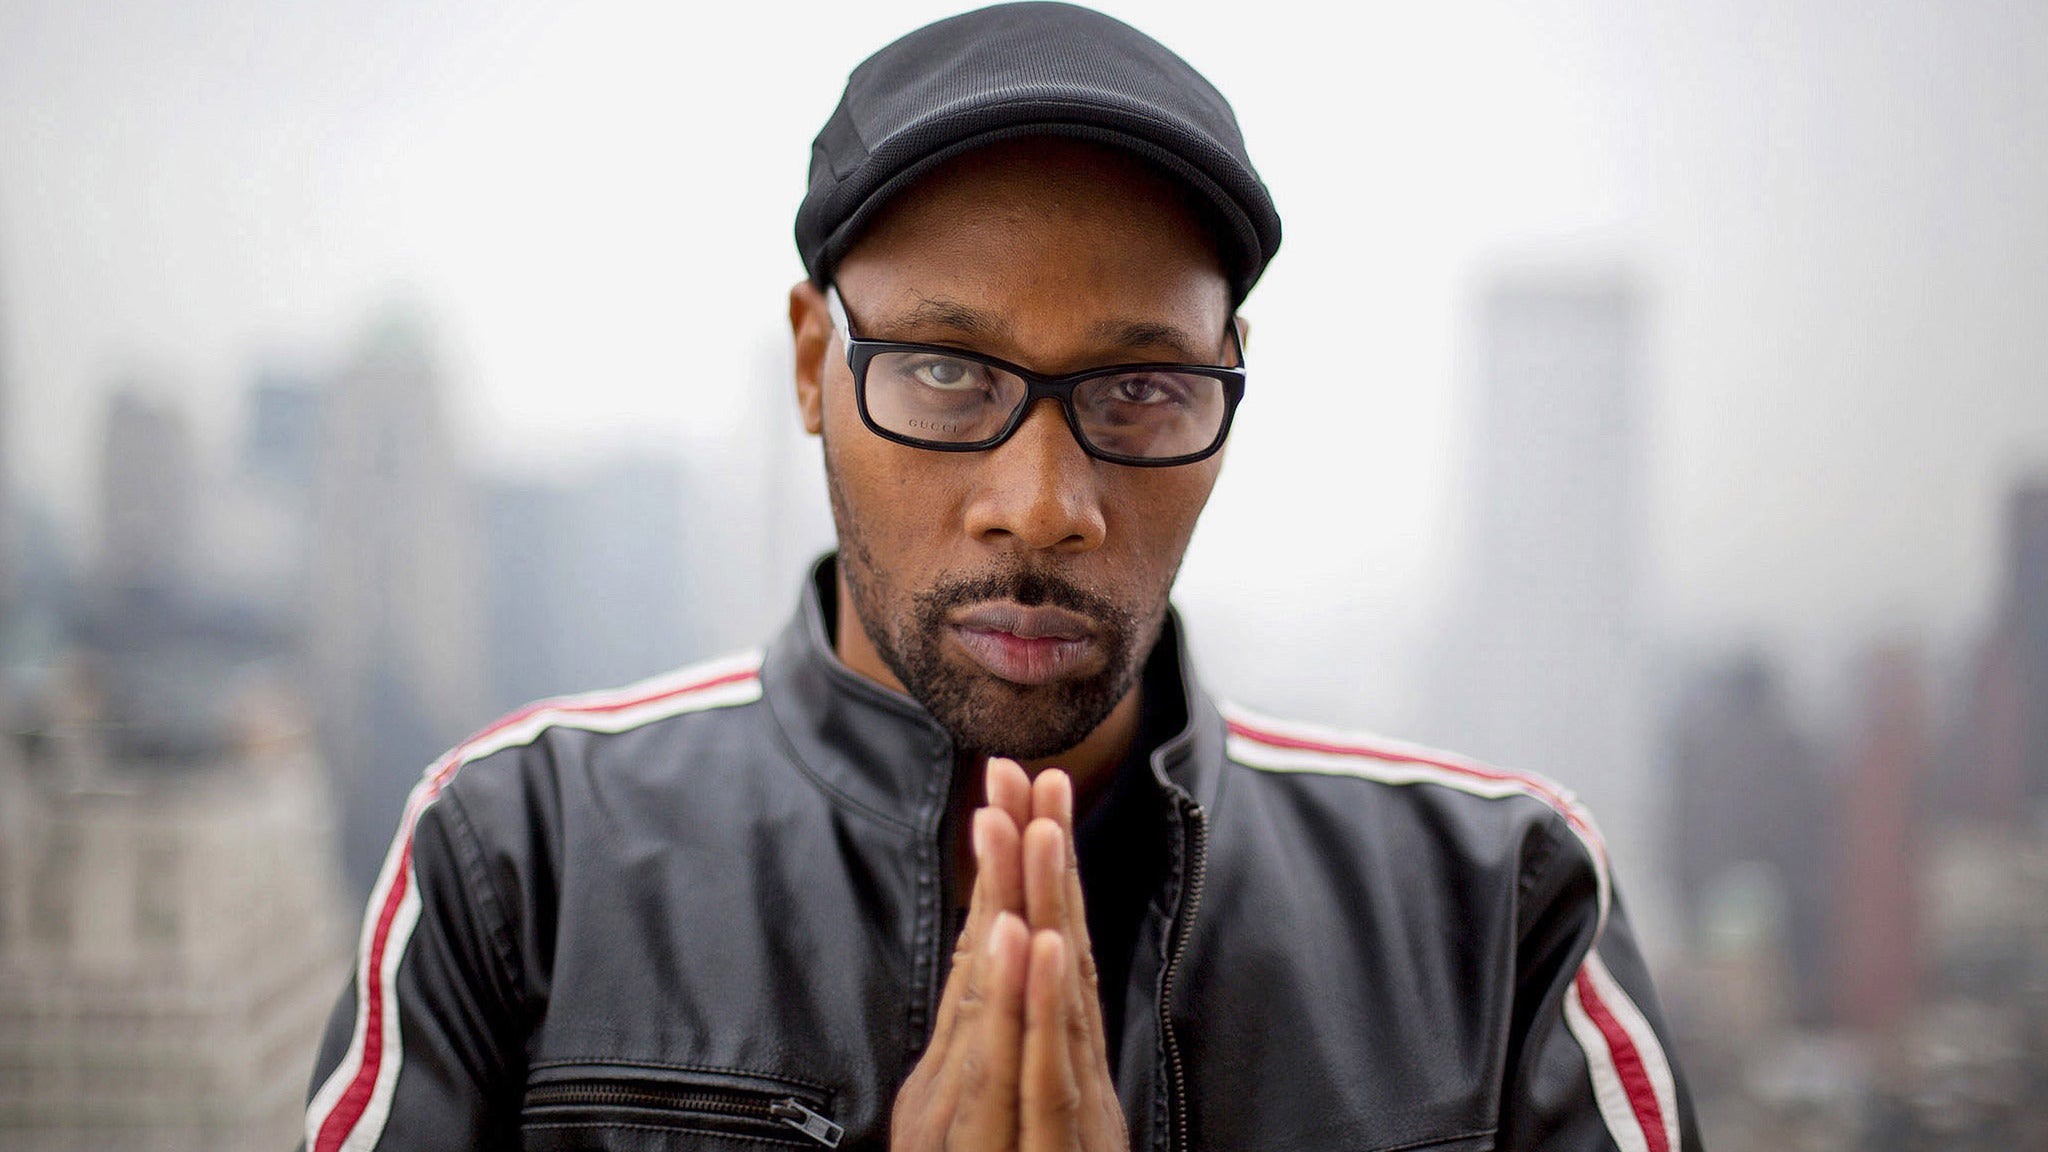 RZA - The 36 Chambers 30th Anniversary Celebration in New York promo photo for Live Nation presale offer code